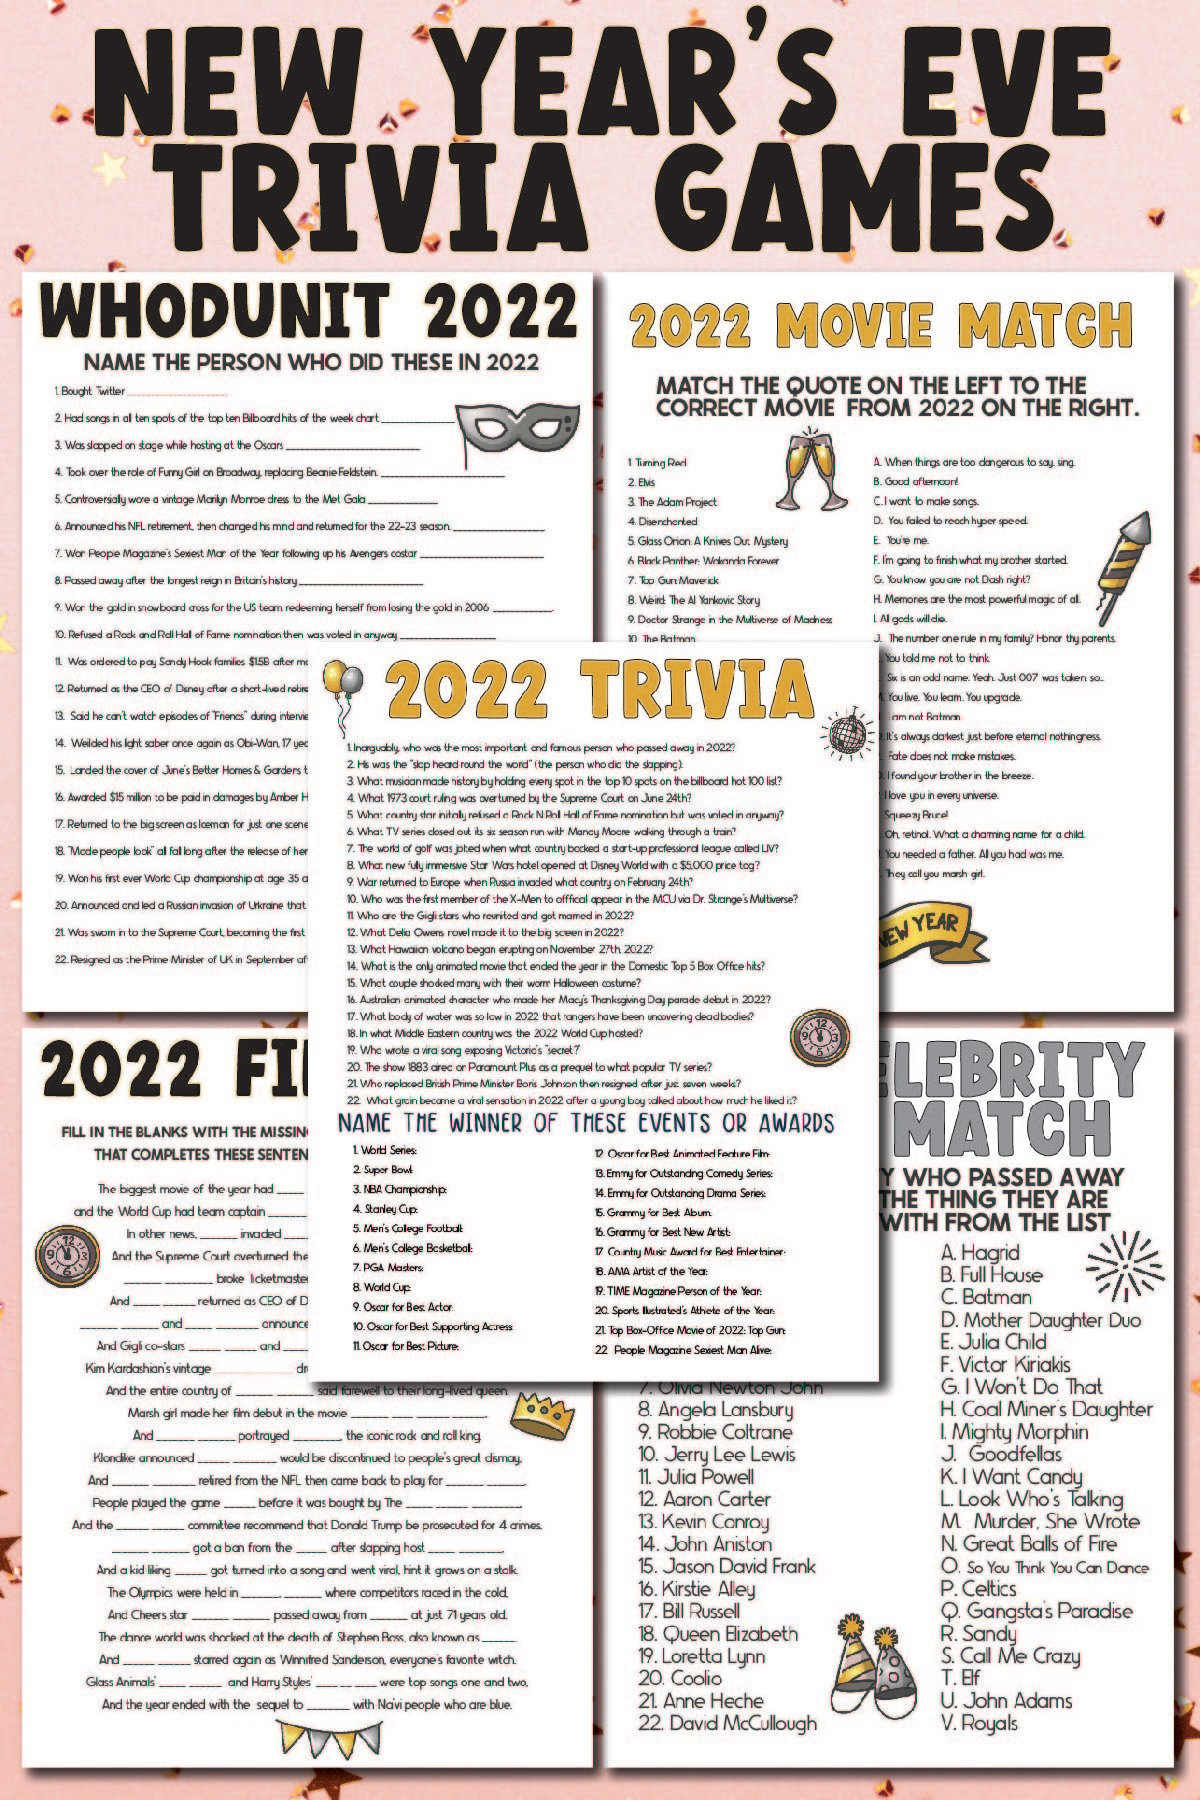 collage of New Year's Eve trivia games